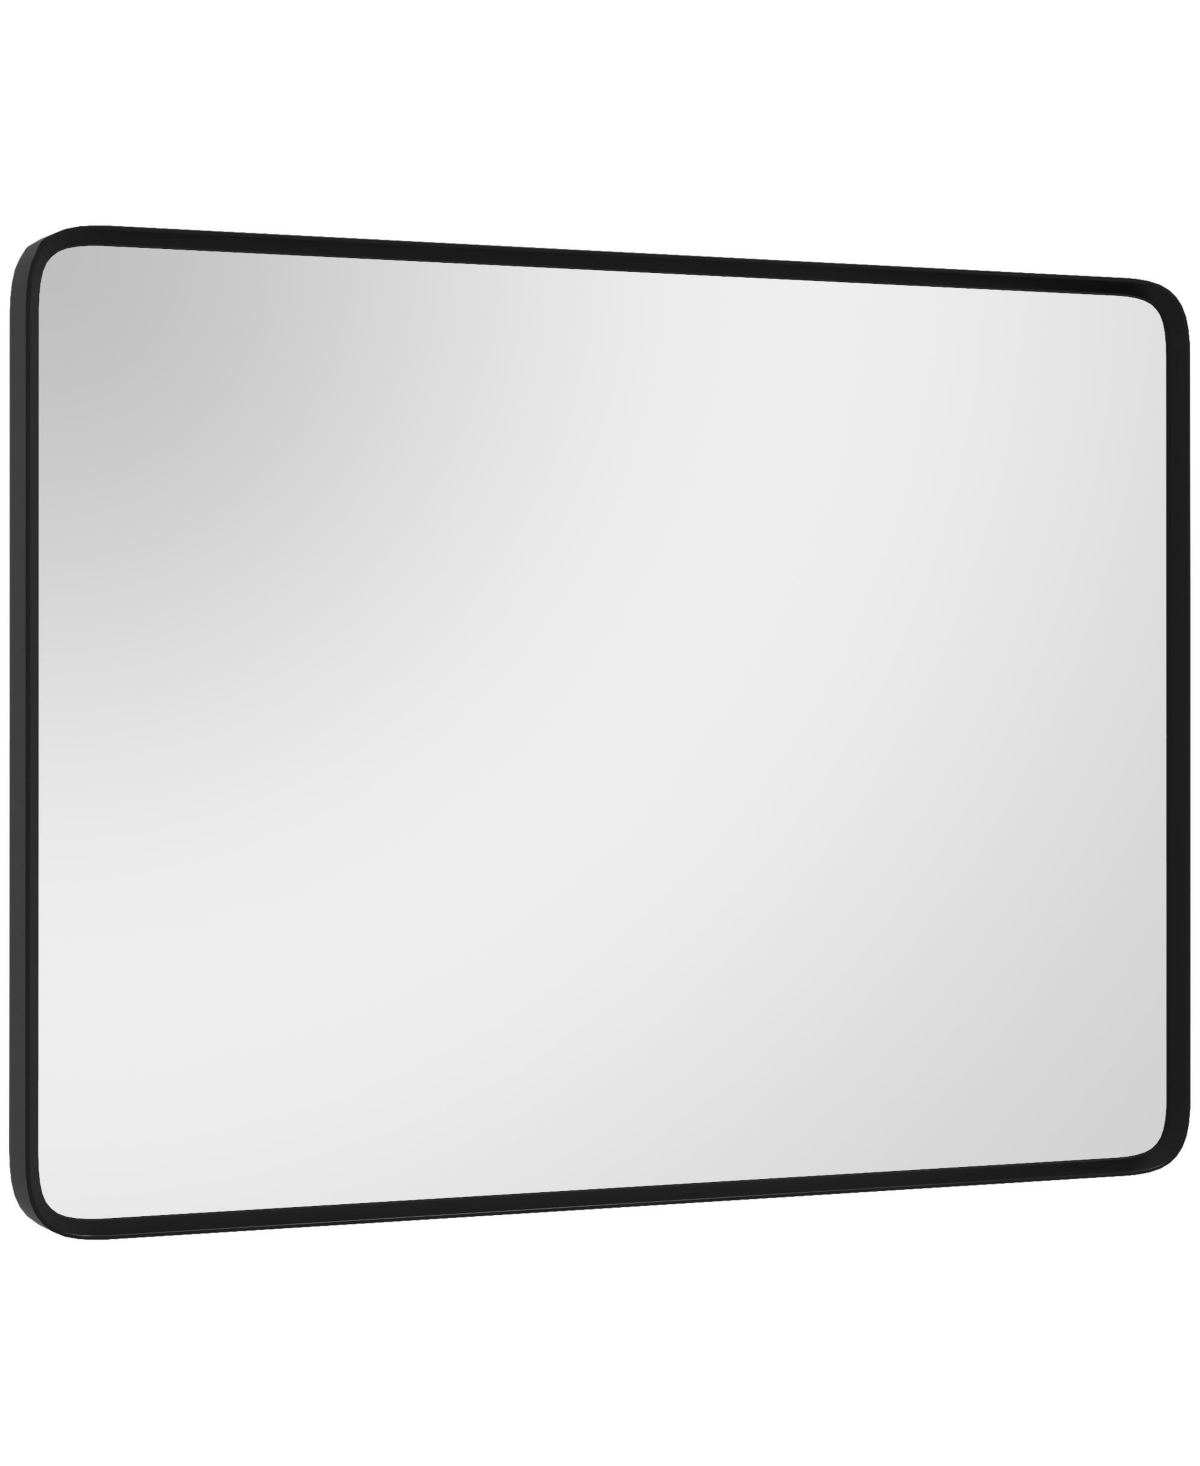 29.75 x 21.75 Wall-Mounted Living Room Rectangle Mirror - Black